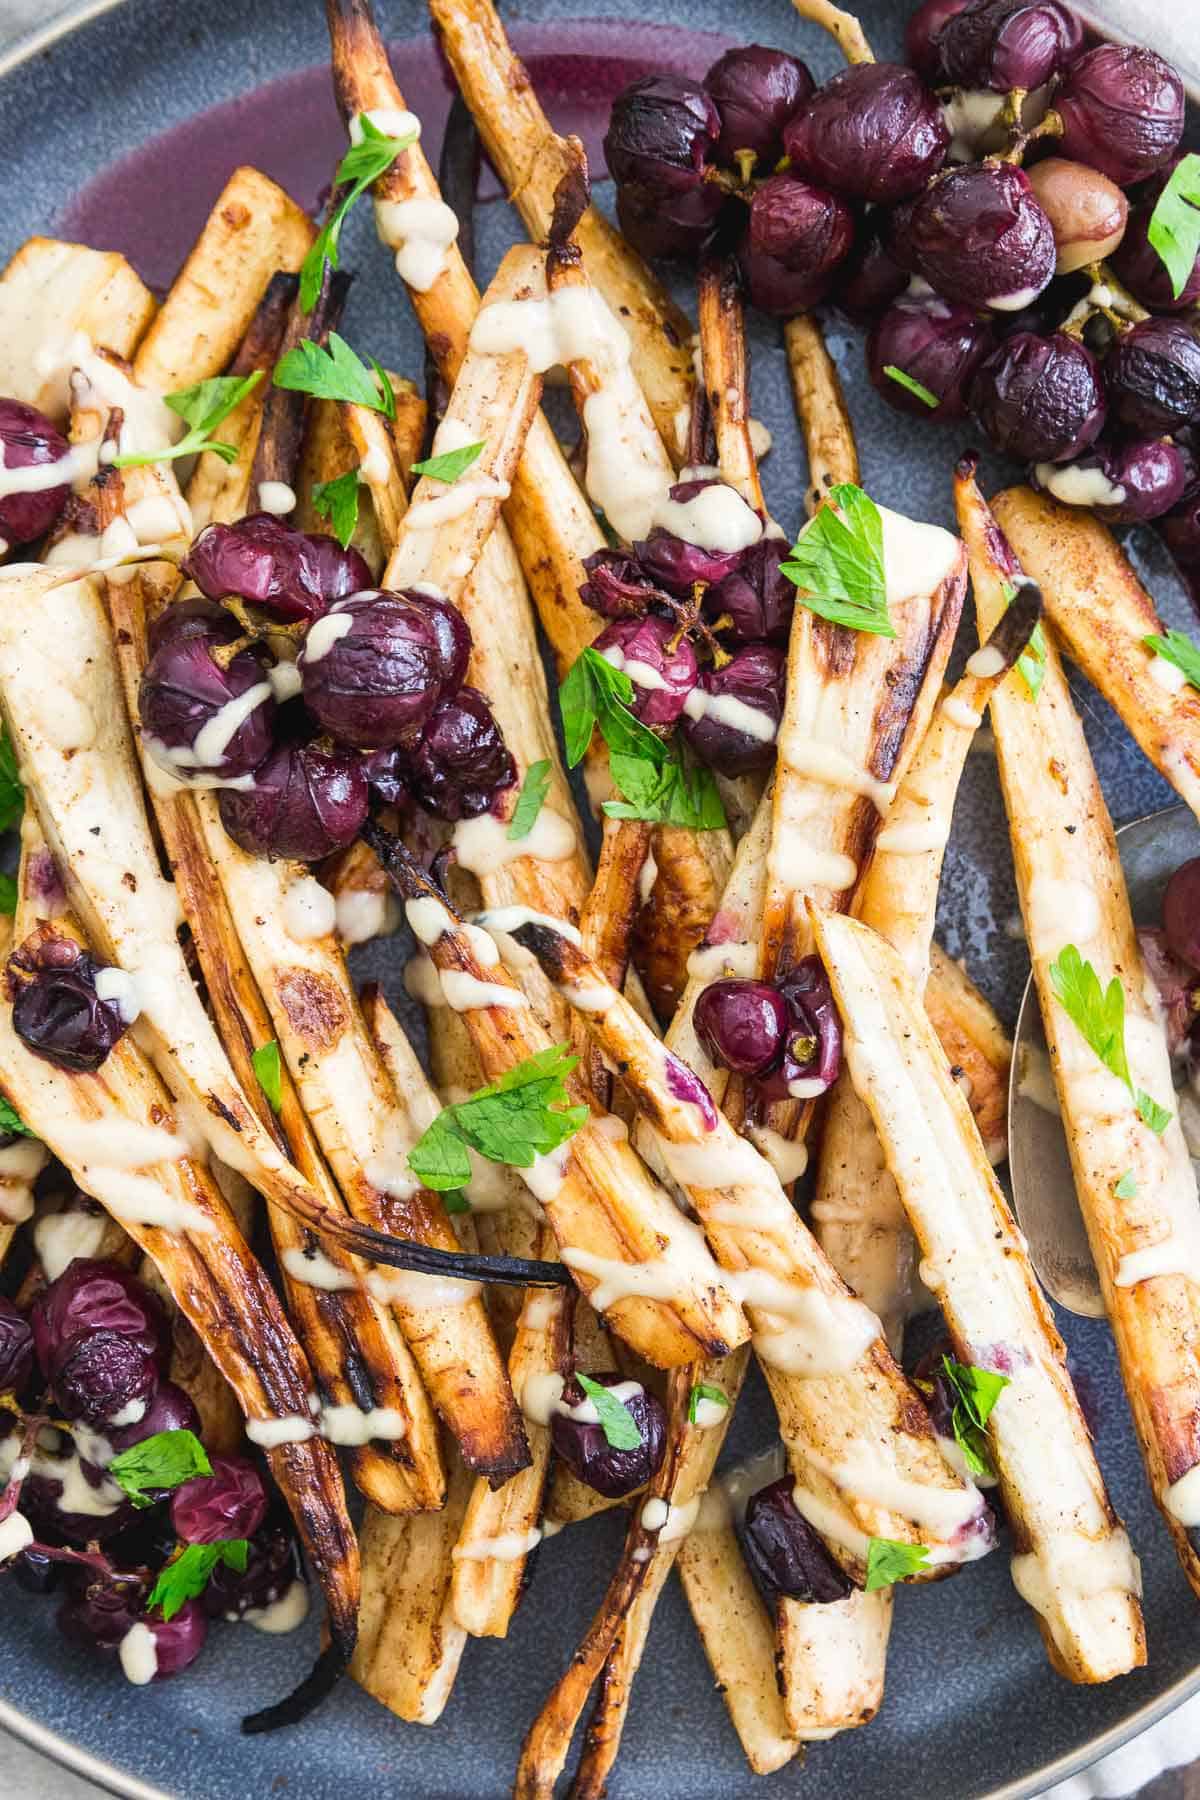 Cinnamon sugar roasted parsnips with concord grapes and a sweet maple hummus drizzle make a delicious and impressive holiday side dish. 